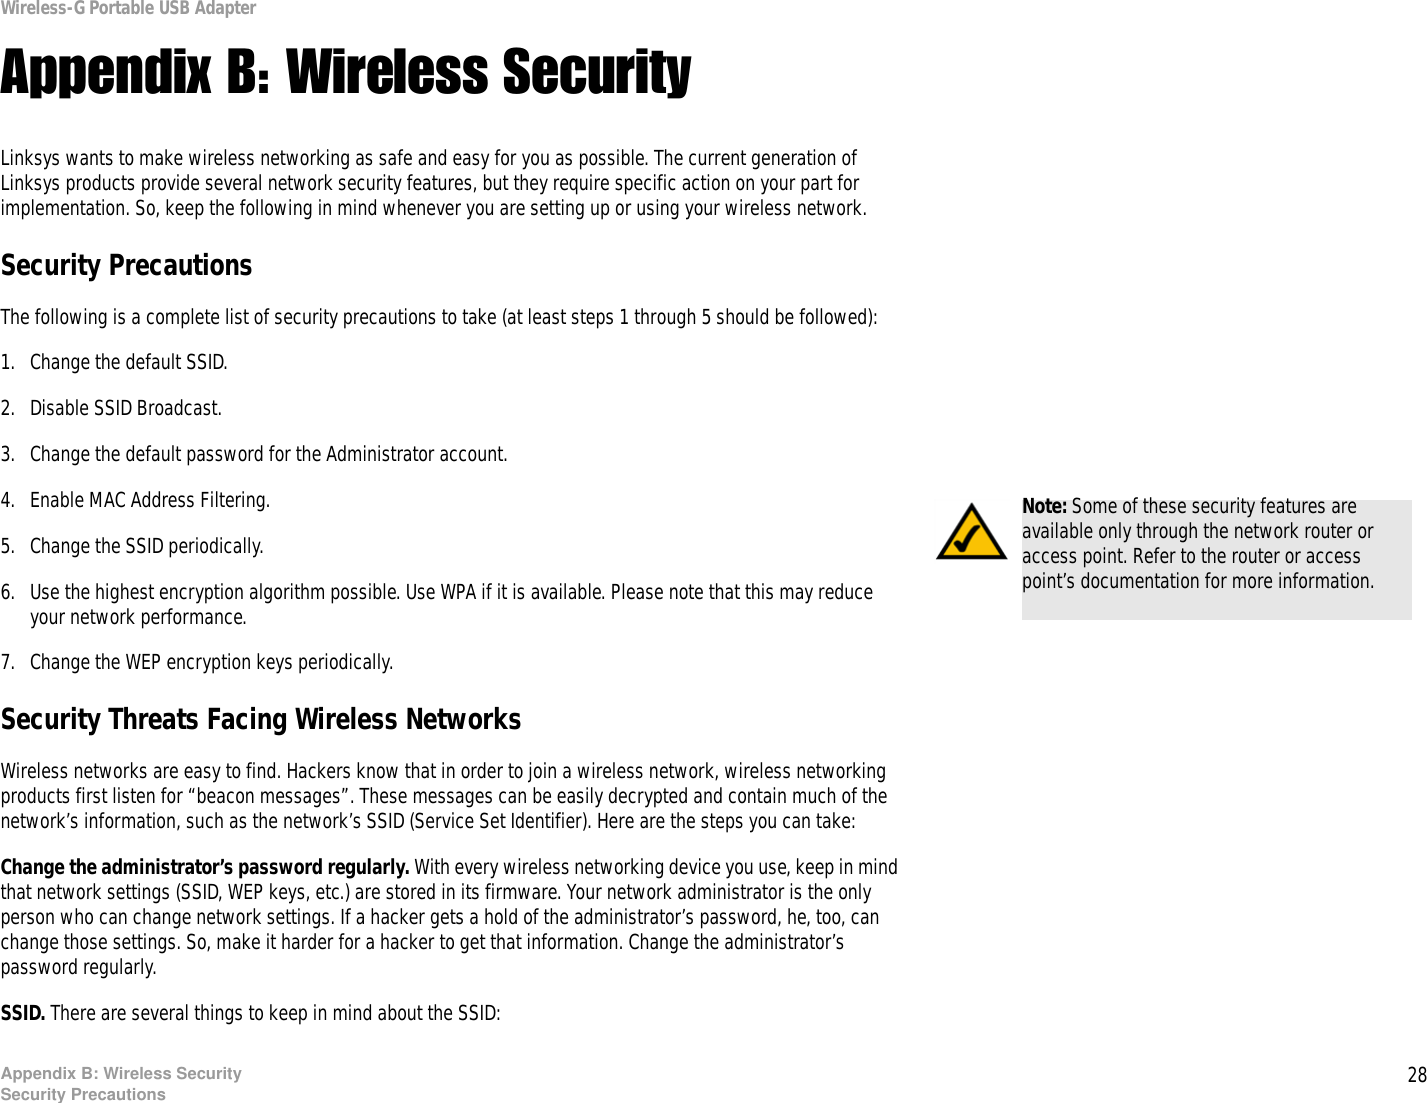 28Appendix B: Wireless SecuritySecurity PrecautionsWireless-G Portable USB AdapterAppendix B: Wireless SecurityLinksys wants to make wireless networking as safe and easy for you as possible. The current generation of Linksys products provide several network security features, but they require specific action on your part for implementation. So, keep the following in mind whenever you are setting up or using your wireless network.Security PrecautionsThe following is a complete list of security precautions to take (at least steps 1 through 5 should be followed):1. Change the default SSID. 2. Disable SSID Broadcast. 3. Change the default password for the Administrator account. 4. Enable MAC Address Filtering. 5. Change the SSID periodically. 6. Use the highest encryption algorithm possible. Use WPA if it is available. Please note that this may reduce your network performance. 7. Change the WEP encryption keys periodically. Security Threats Facing Wireless Networks Wireless networks are easy to find. Hackers know that in order to join a wireless network, wireless networking products first listen for “beacon messages”. These messages can be easily decrypted and contain much of the network’s information, such as the network’s SSID (Service Set Identifier). Here are the steps you can take:Change the administrator’s password regularly. With every wireless networking device you use, keep in mind that network settings (SSID, WEP keys, etc.) are stored in its firmware. Your network administrator is the only person who can change network settings. If a hacker gets a hold of the administrator’s password, he, too, can change those settings. So, make it harder for a hacker to get that information. Change the administrator’s password regularly.SSID. There are several things to keep in mind about the SSID: Note: Some of these security features are available only through the network router or access point. Refer to the router or access point’s documentation for more information.